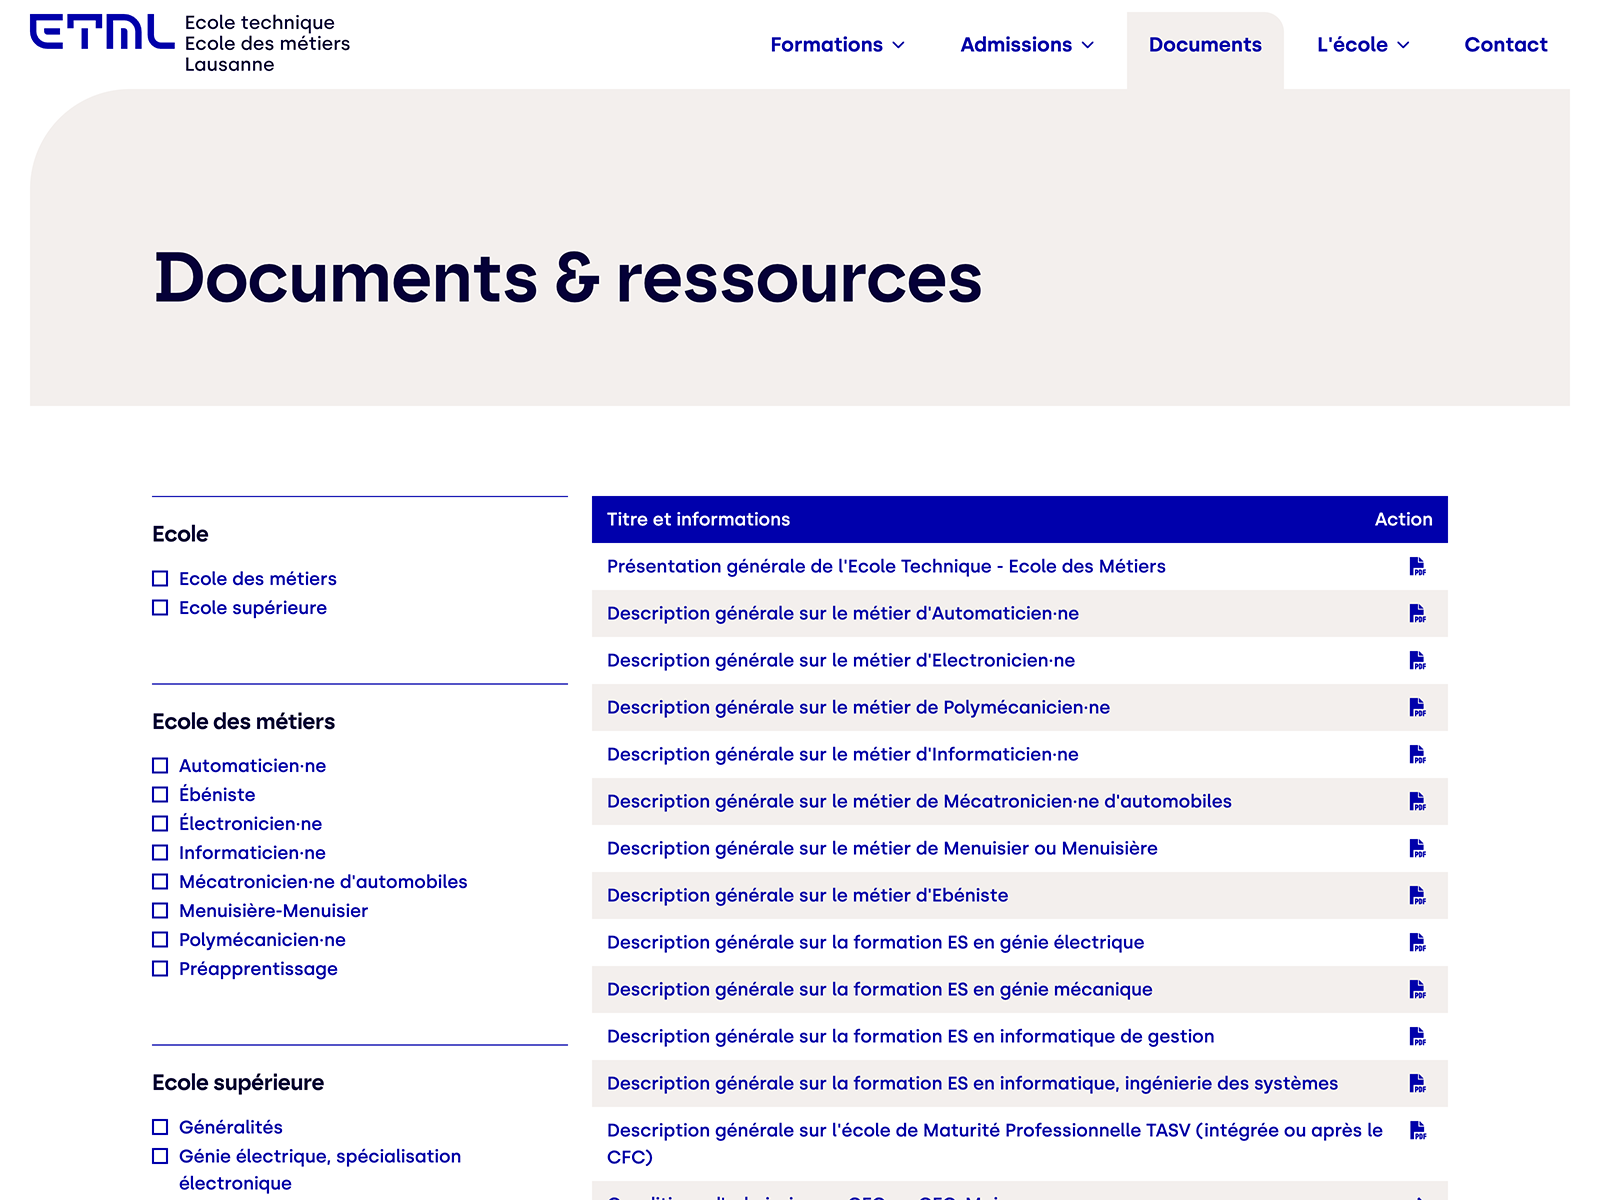 ETML - Documents and links dynamics filters